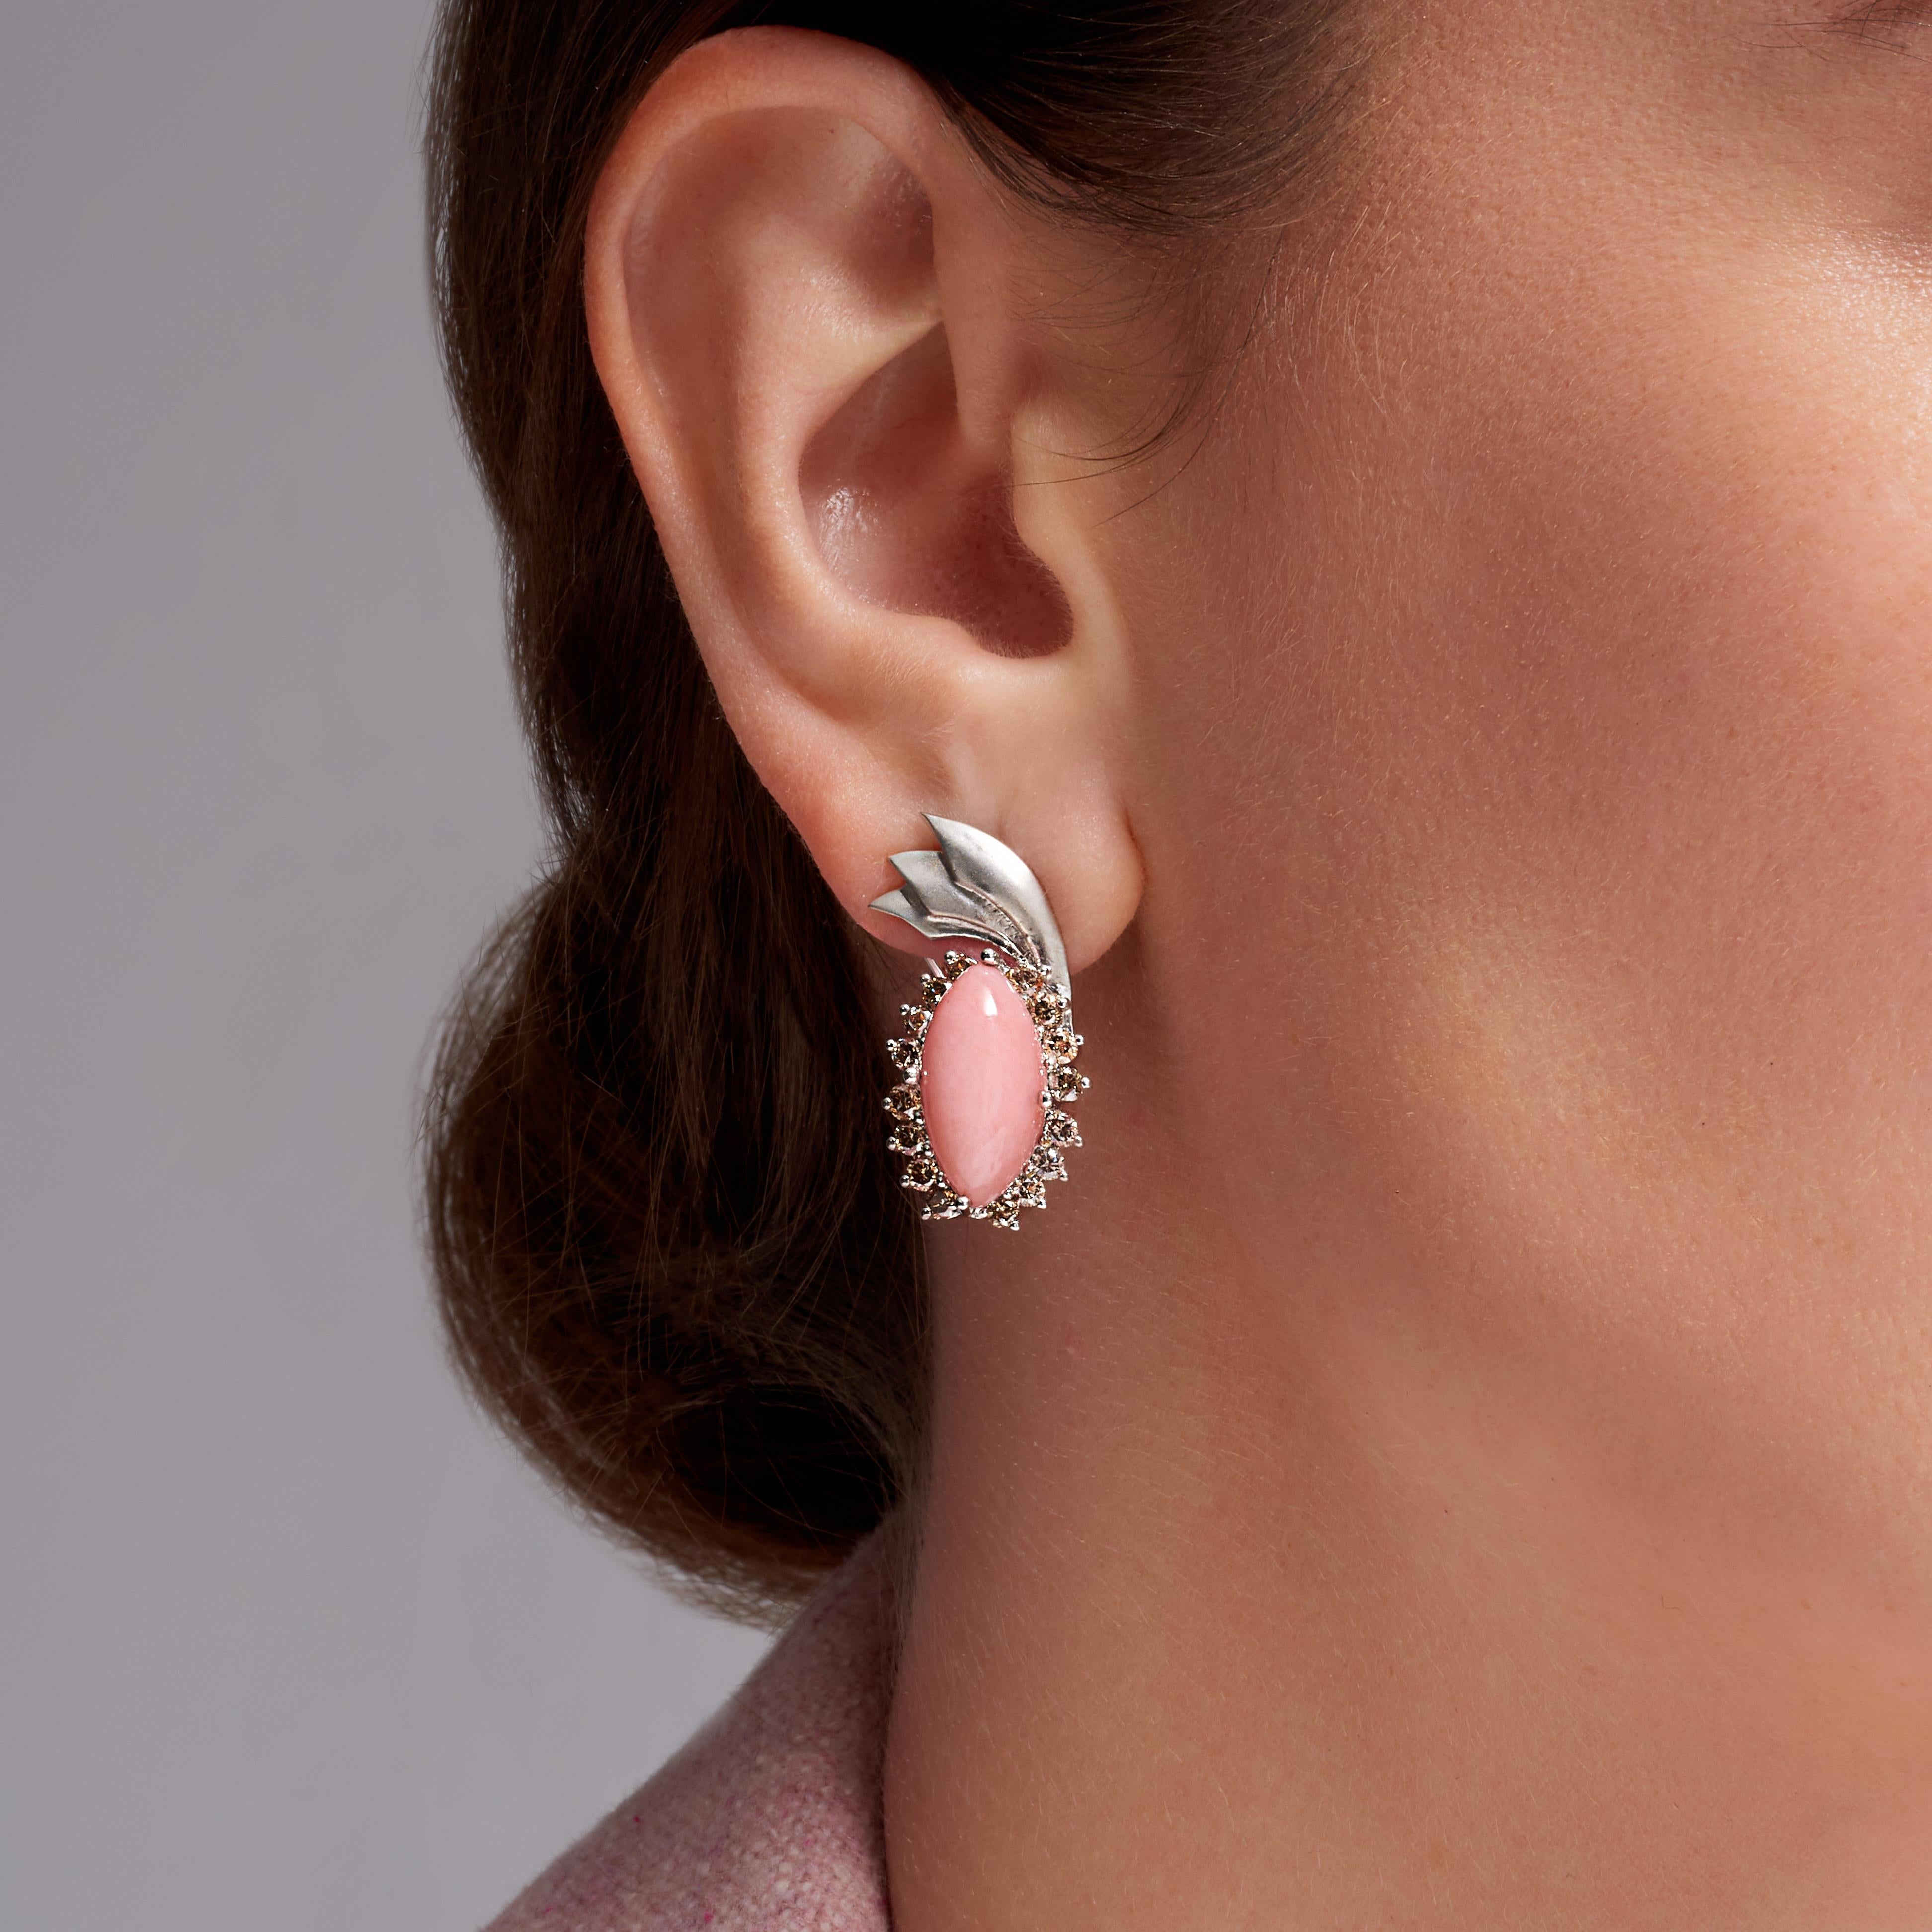 Peruvian Pink Opal Champagne Diamond 18k White Gold Drop Earrings, In Stock.

These earrings feature a large Peruvian Pink Opal as the center stone of the earrings. Surrounding the pink opal are 1.6-carat total-weight natural color champagne